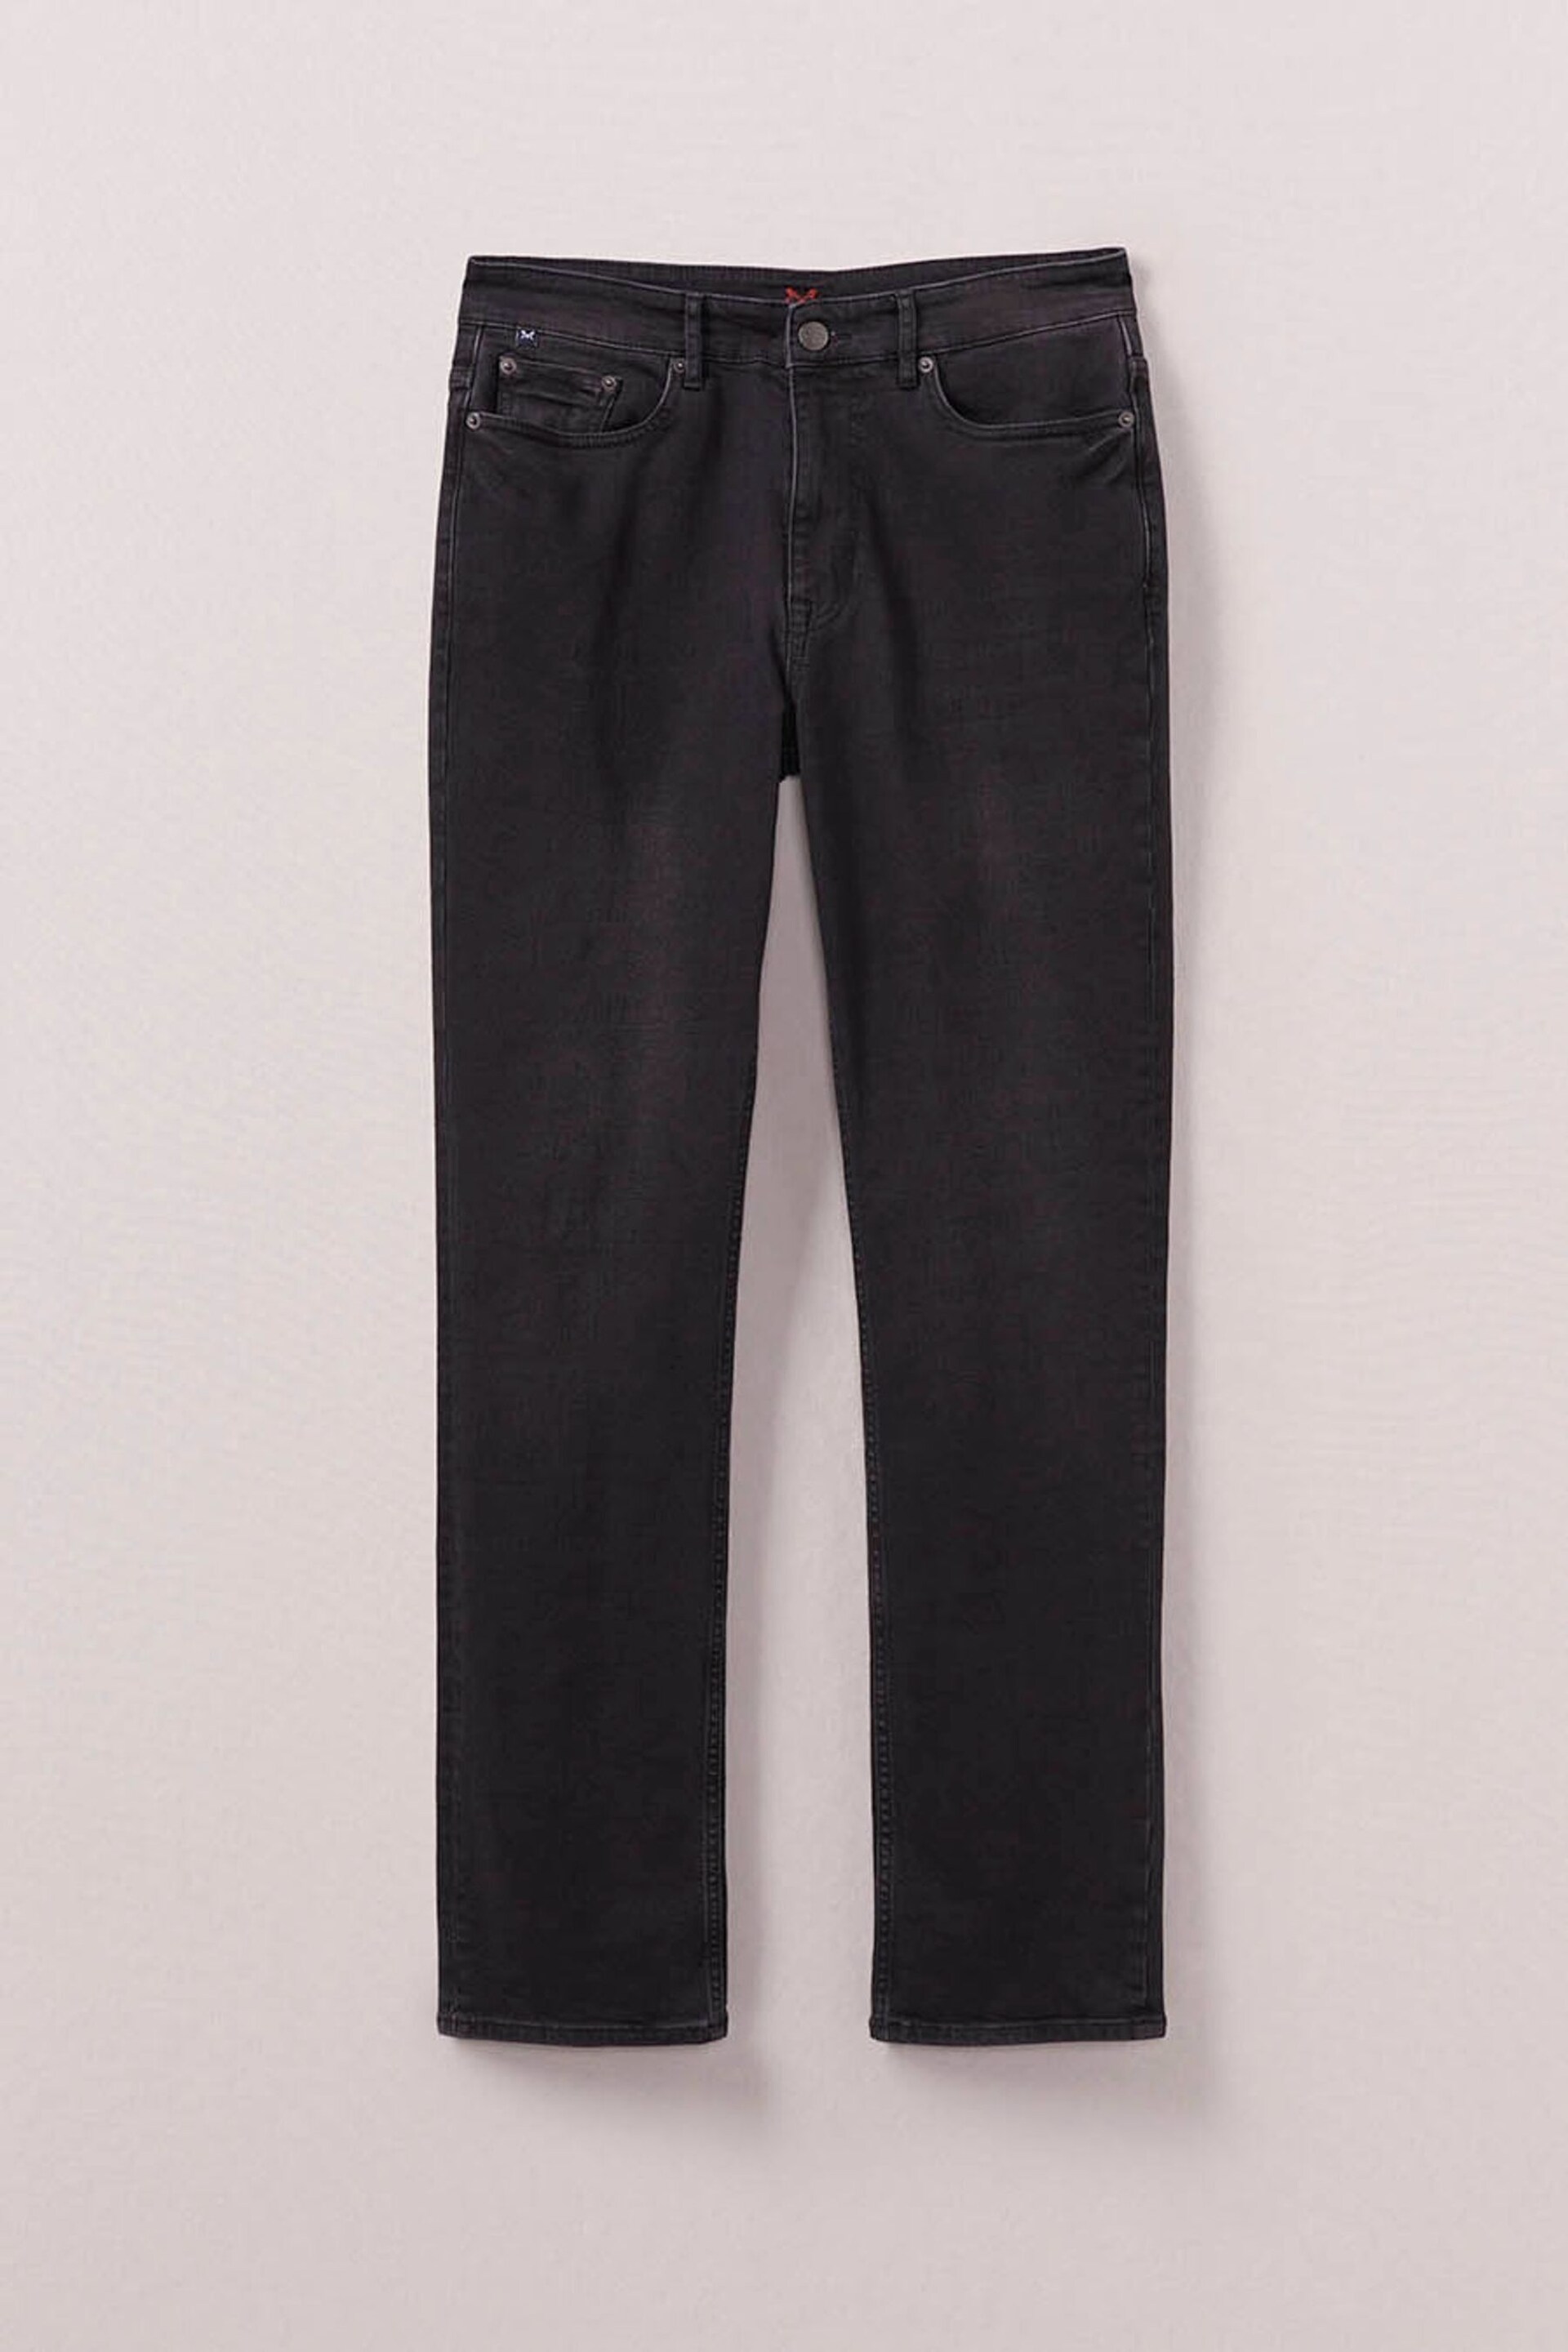 Crew Clothing Parker Straight Jeans - Image 4 of 4